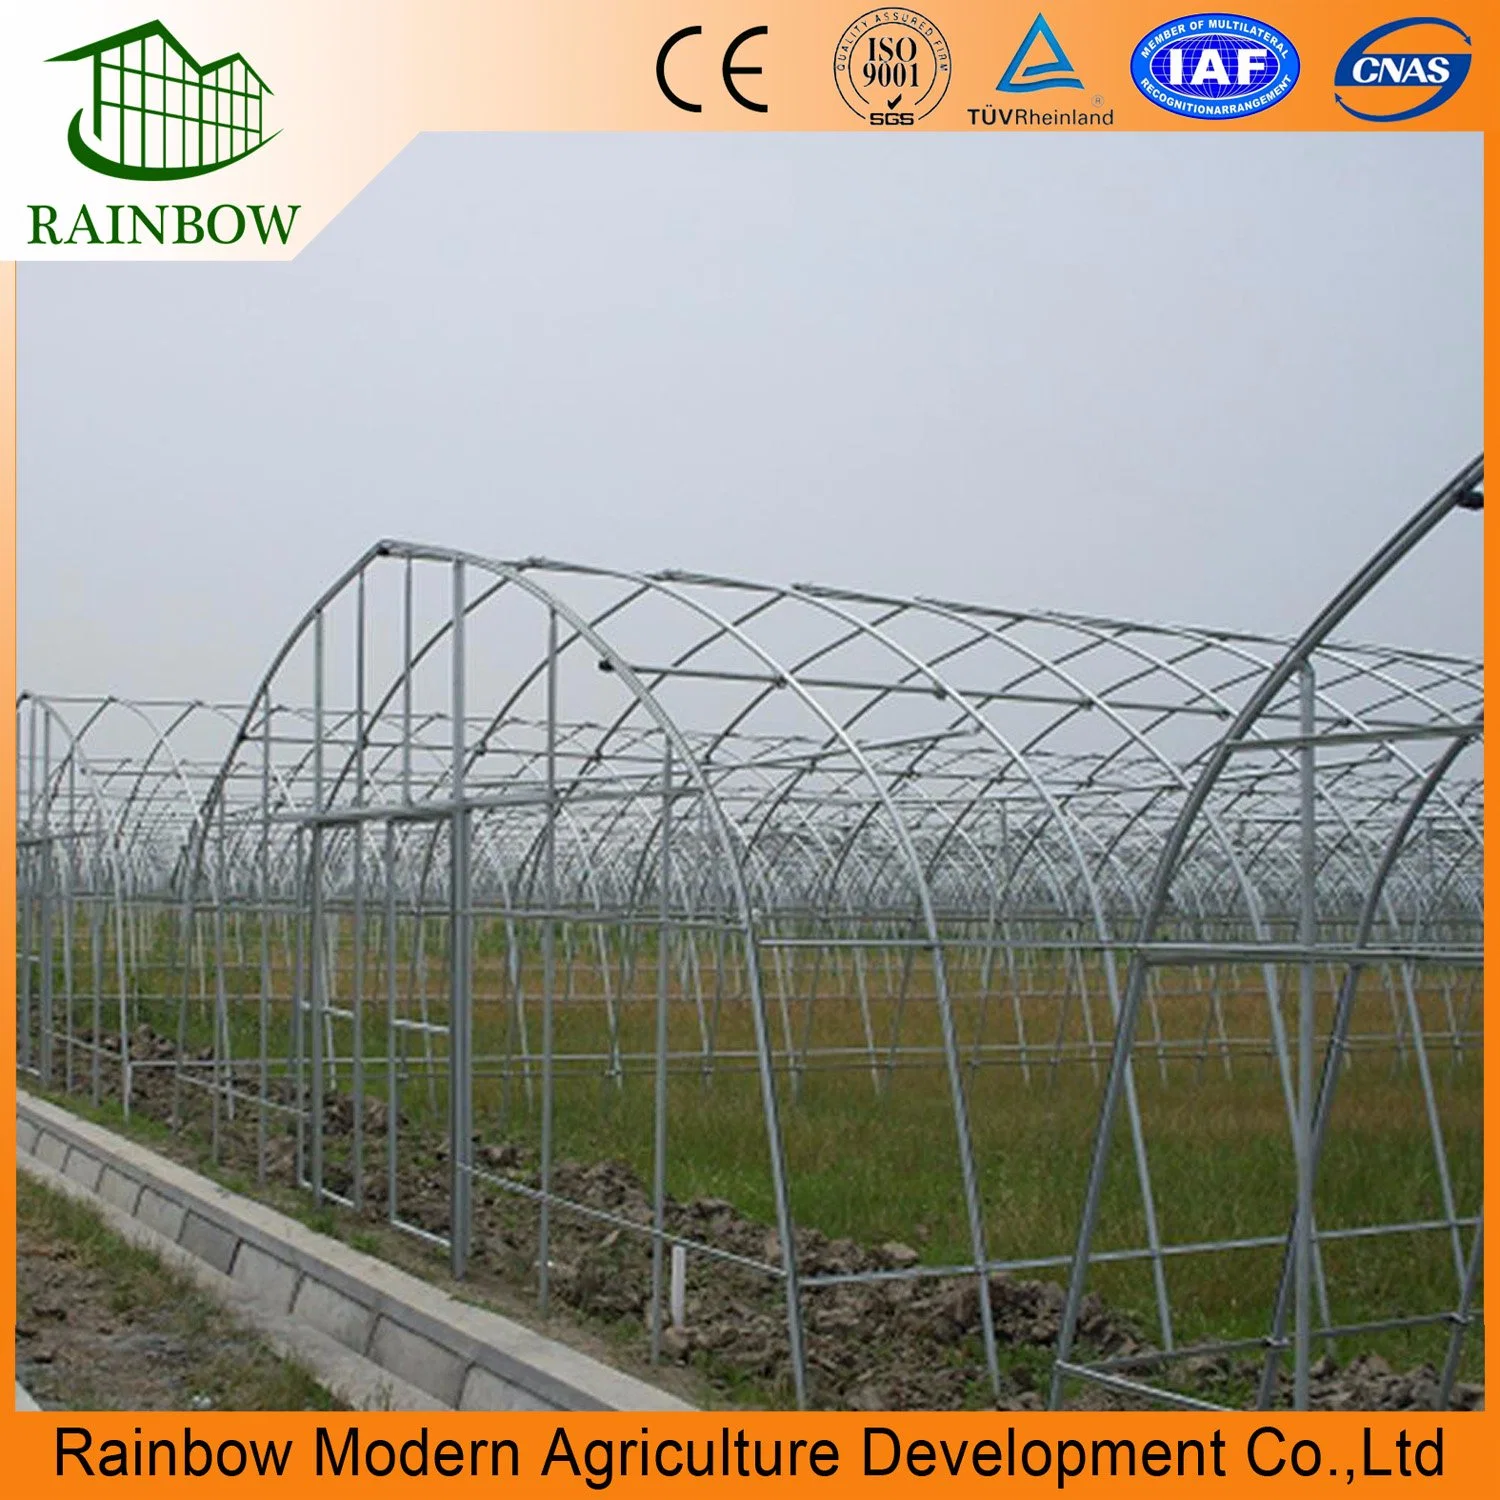 Commercial Single Span Plastic Film Tunnel Greenhouse